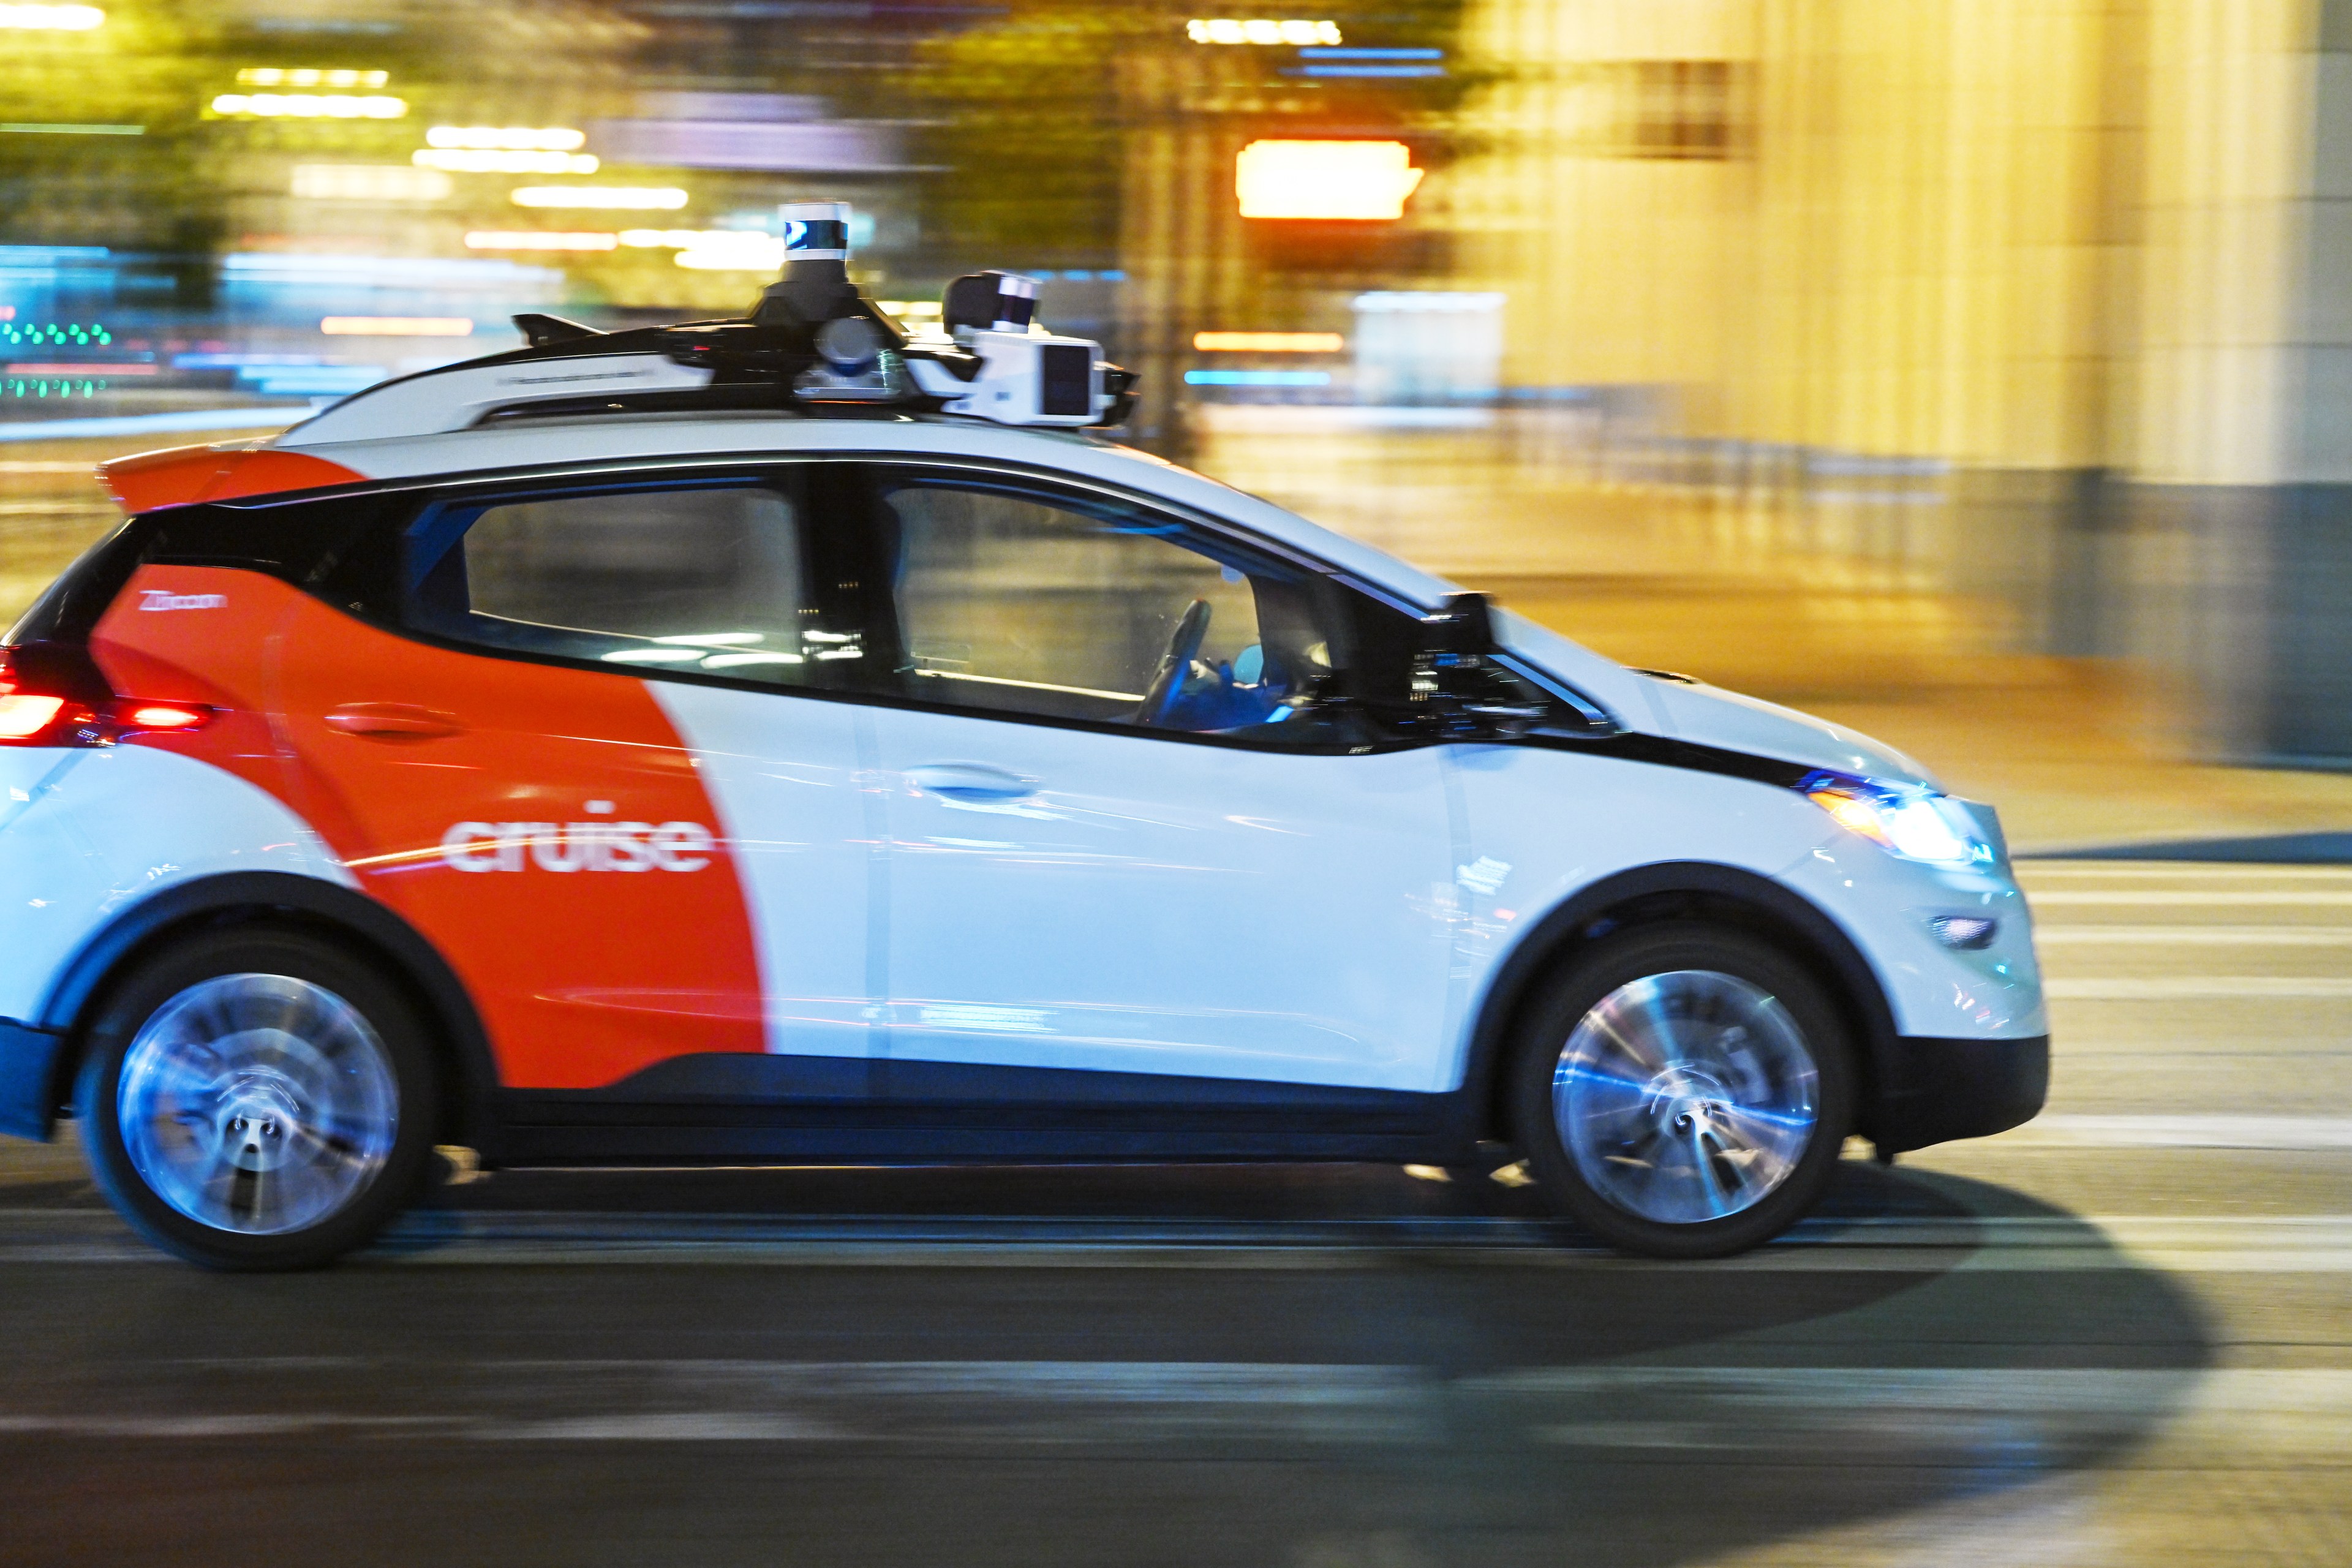 A Cruise vehicle, which is a driverless, autonomous robotaxi, drives at night in San Francisco.